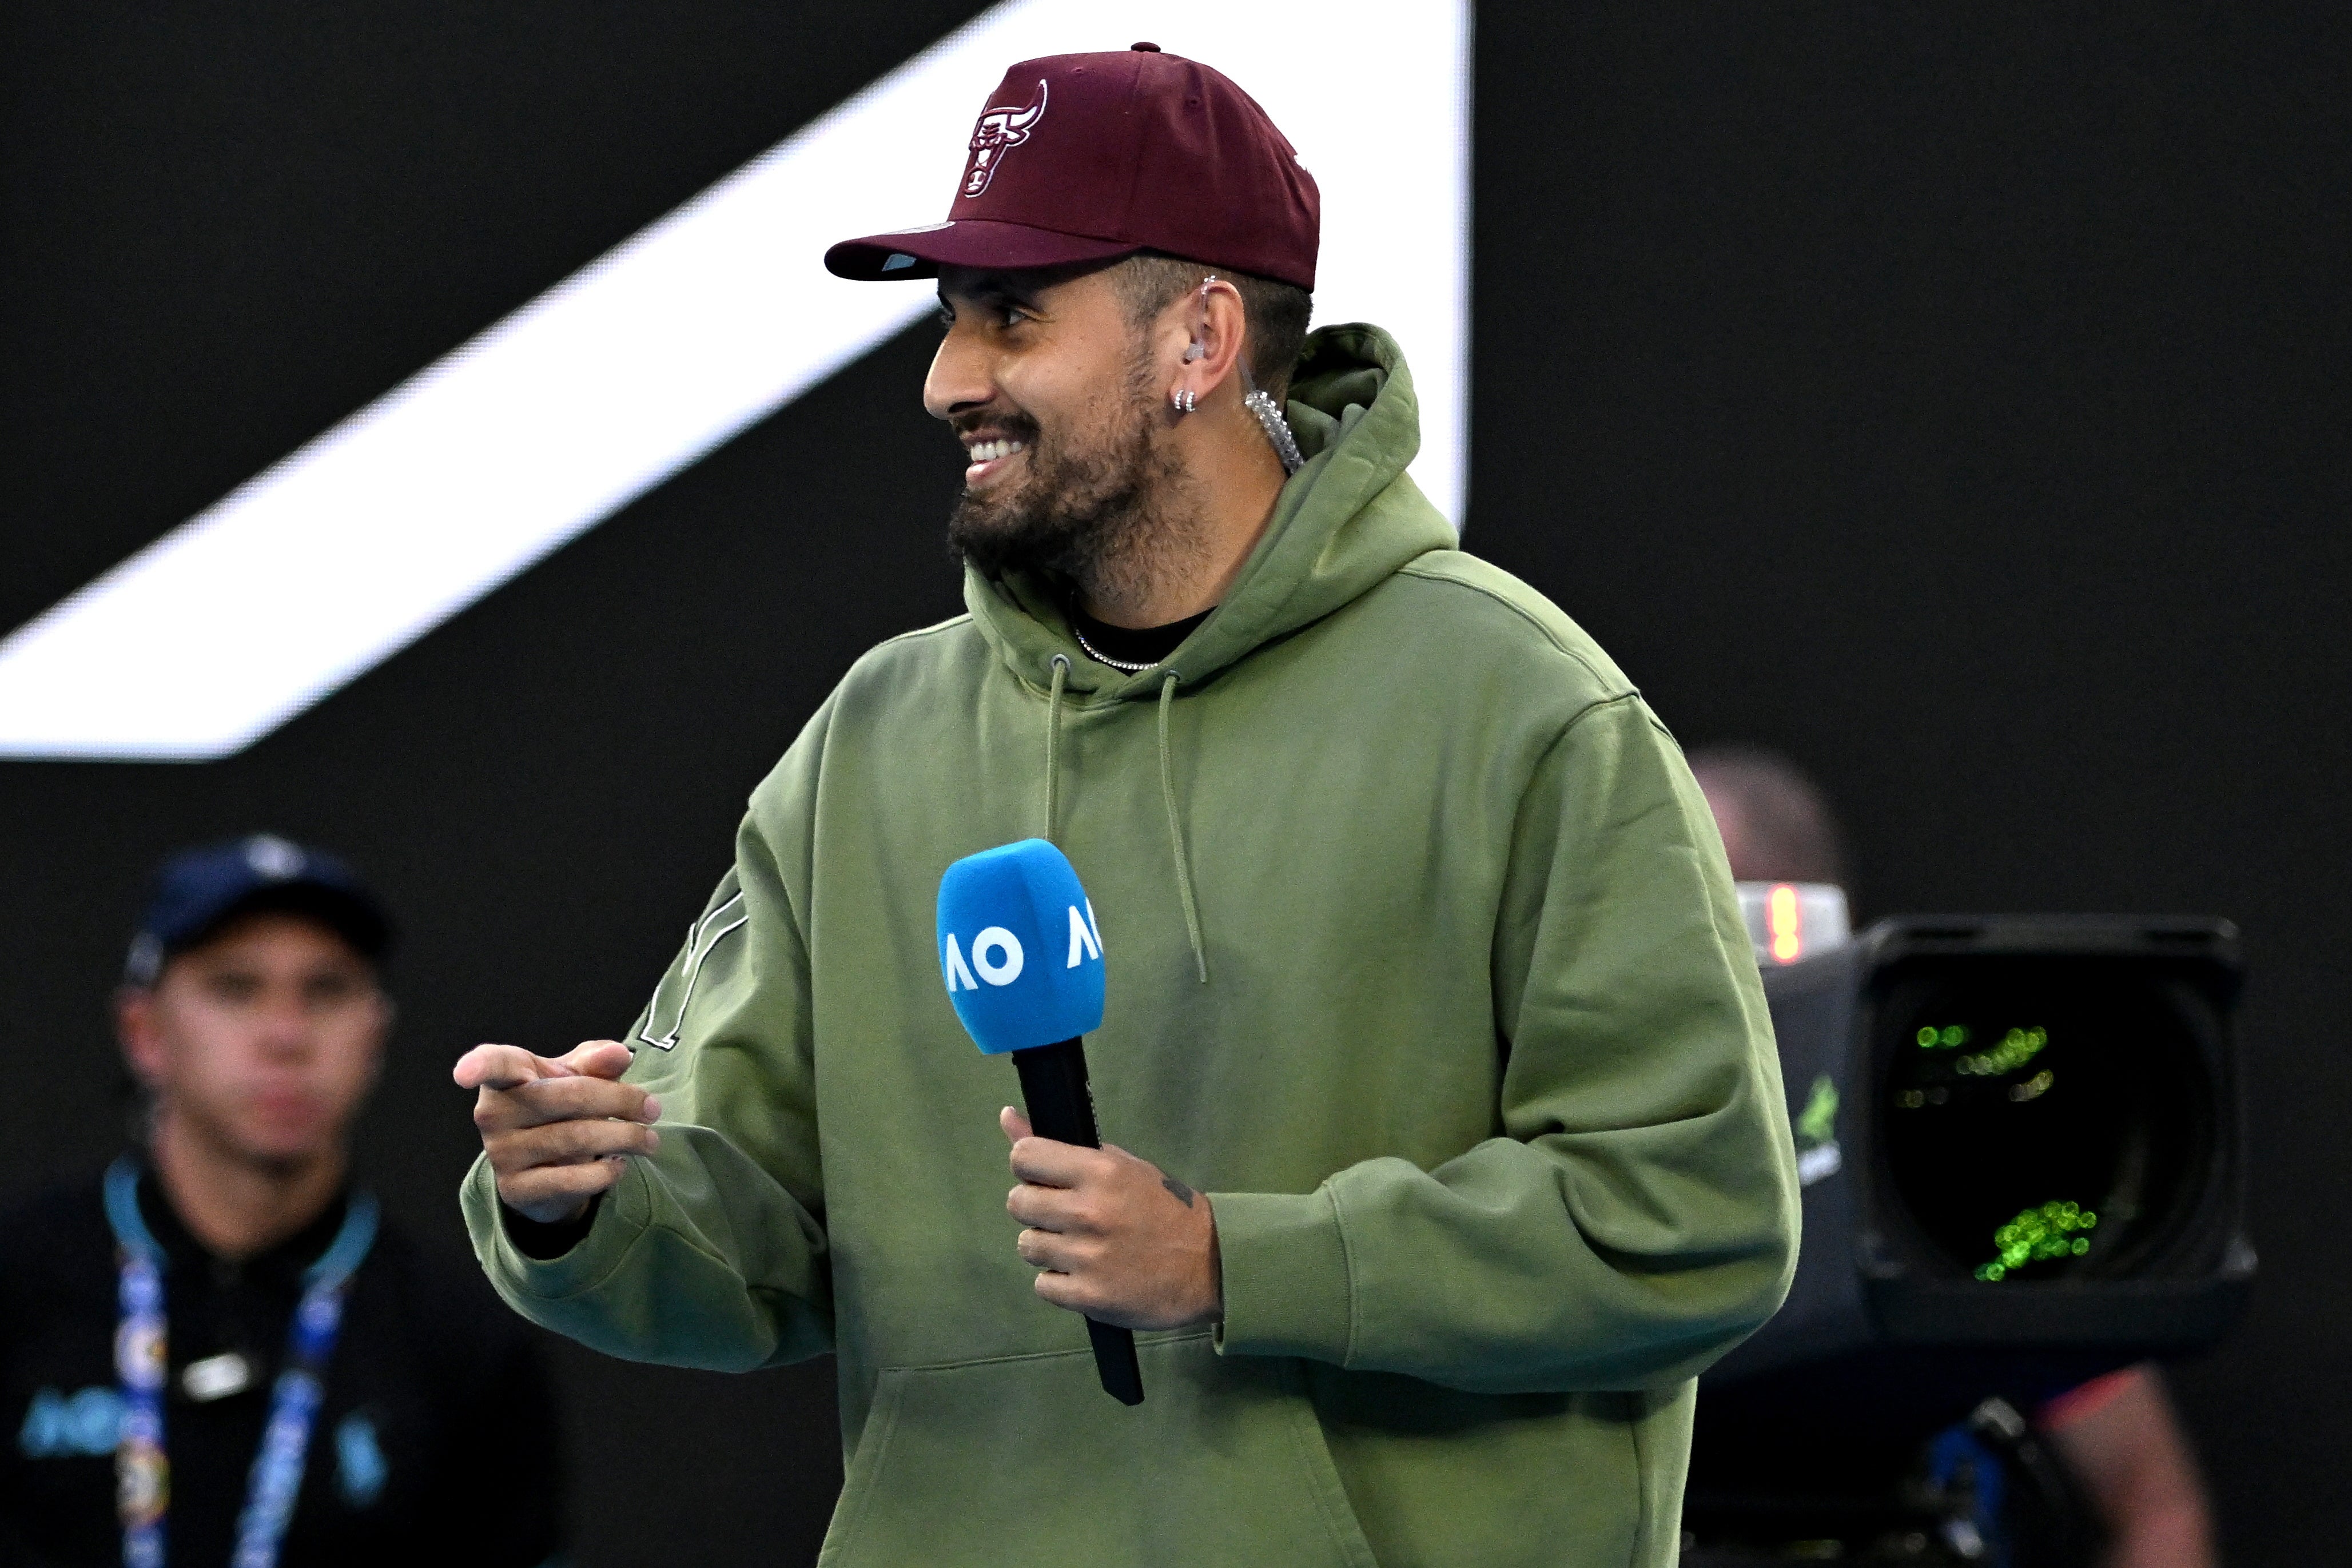 Kyrgios has been on commentary and interviewing duty in Melbourne